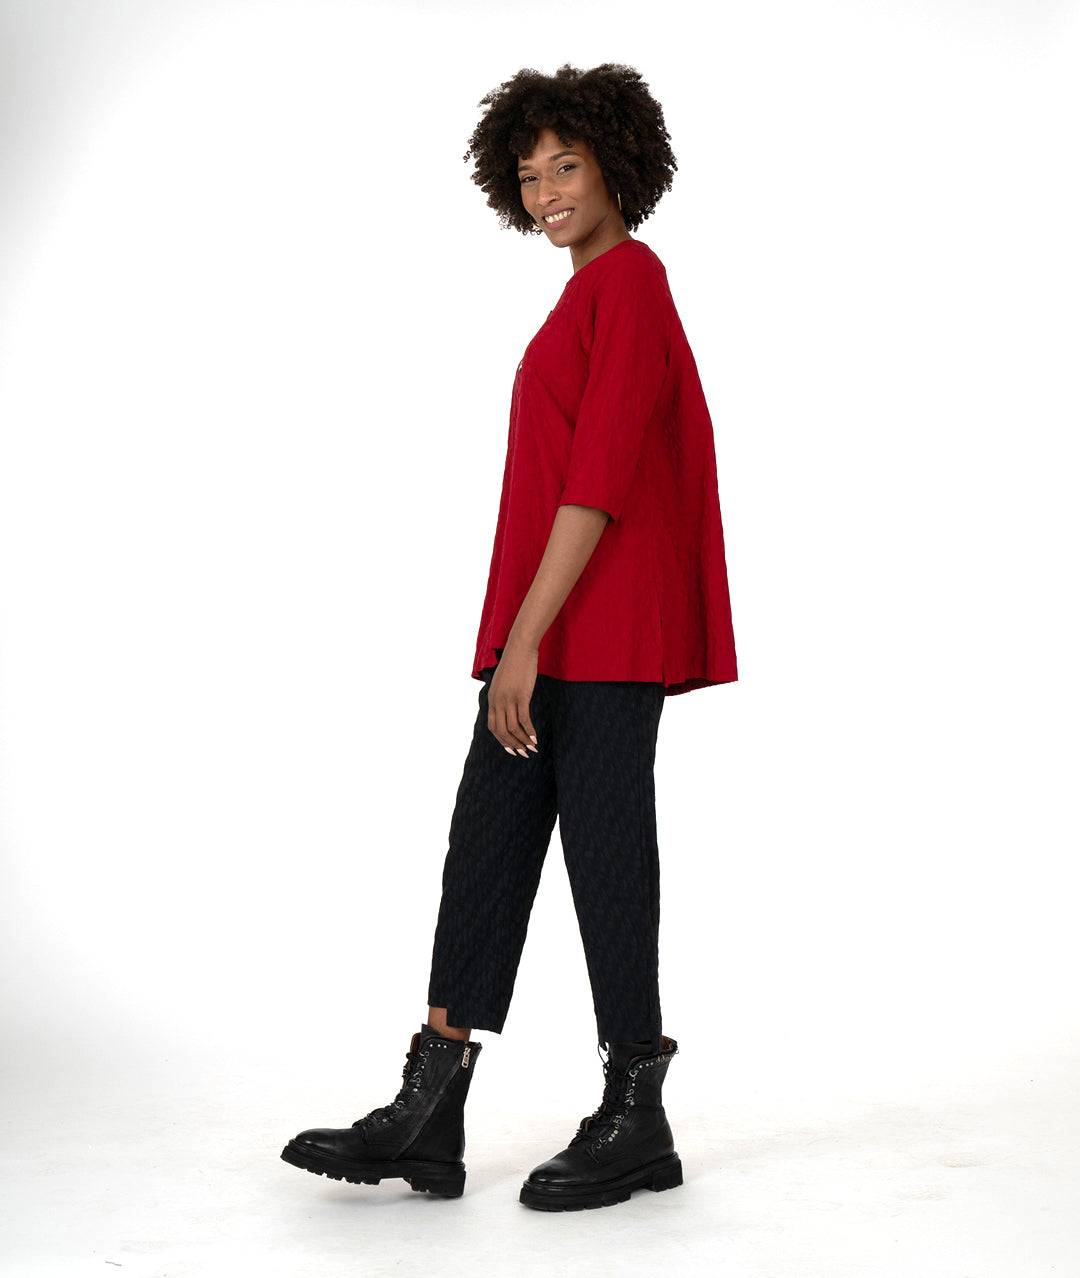 model in a black slim pant and red top, both with asymmetrical hems